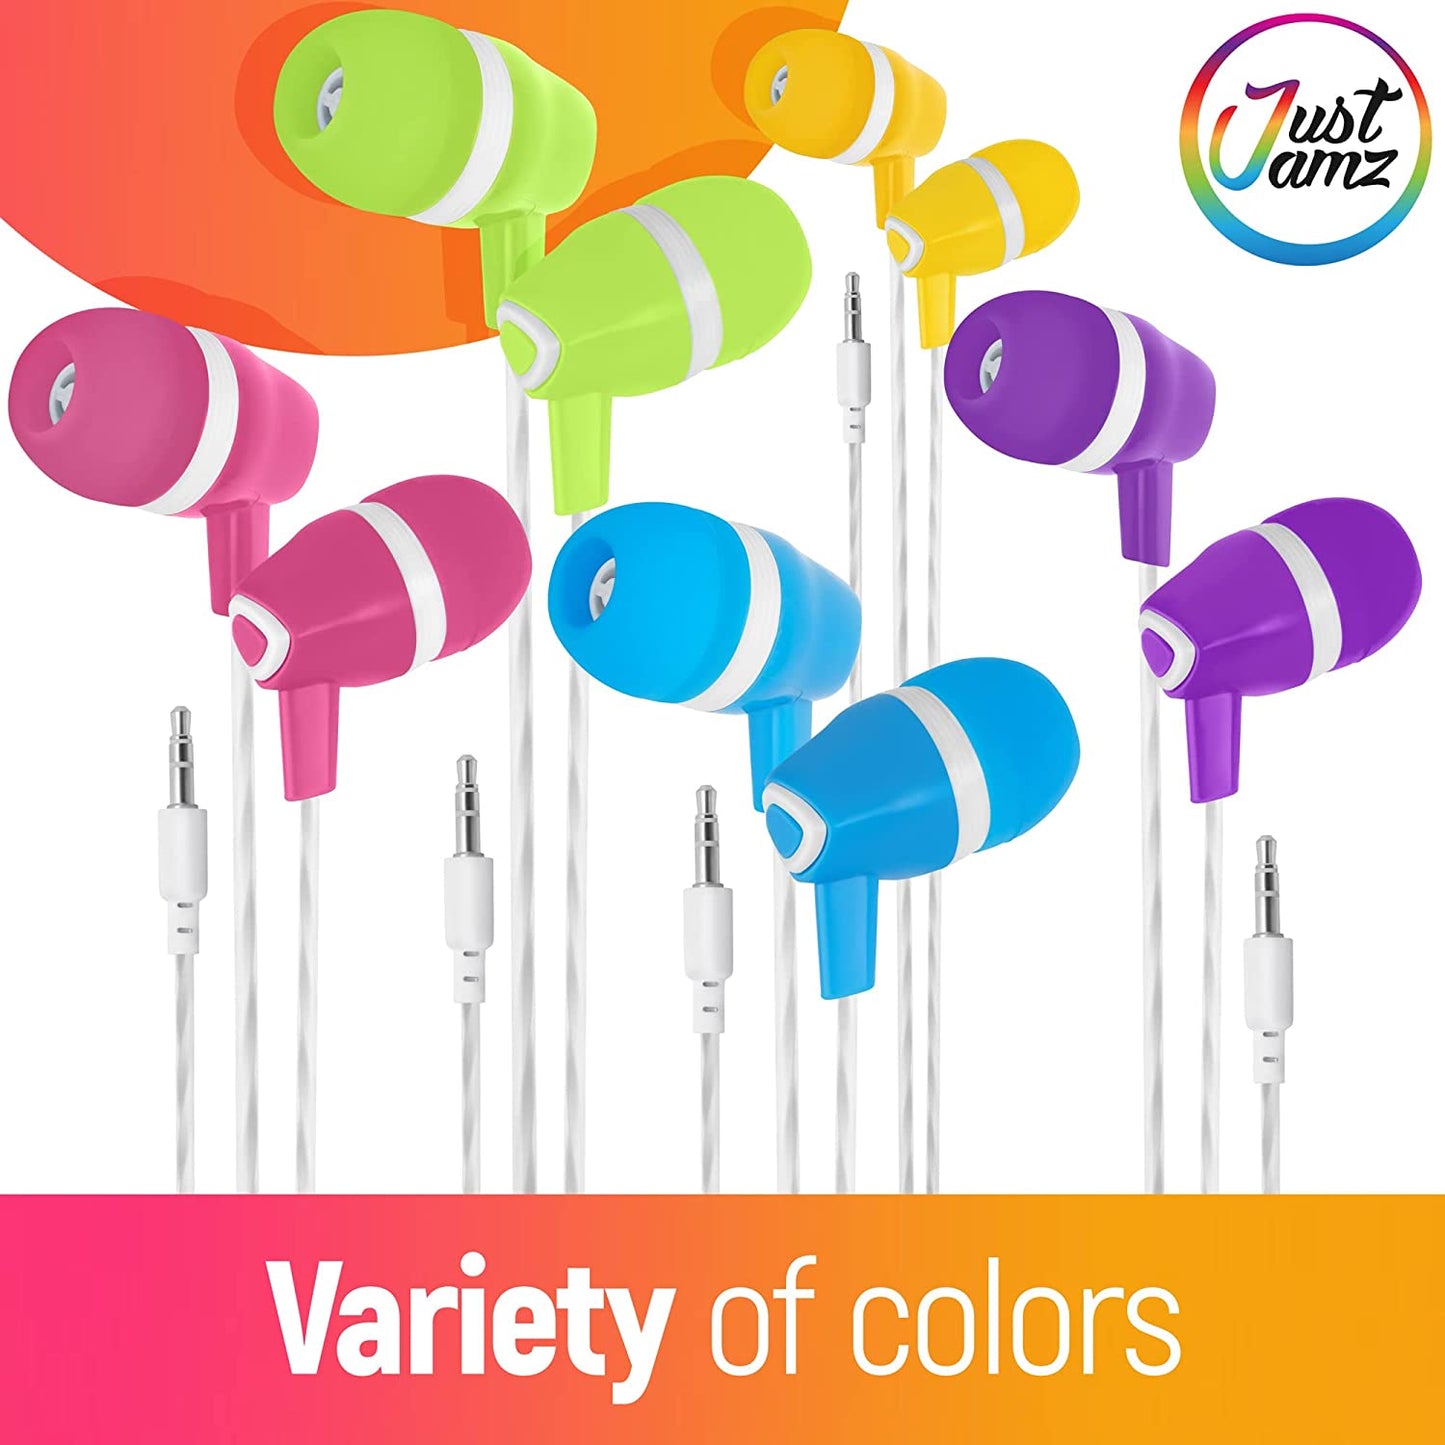 100 Pack of JustJamz Bubbles, Colorful in-Ear Earbuds, Assorted Colors (United States)